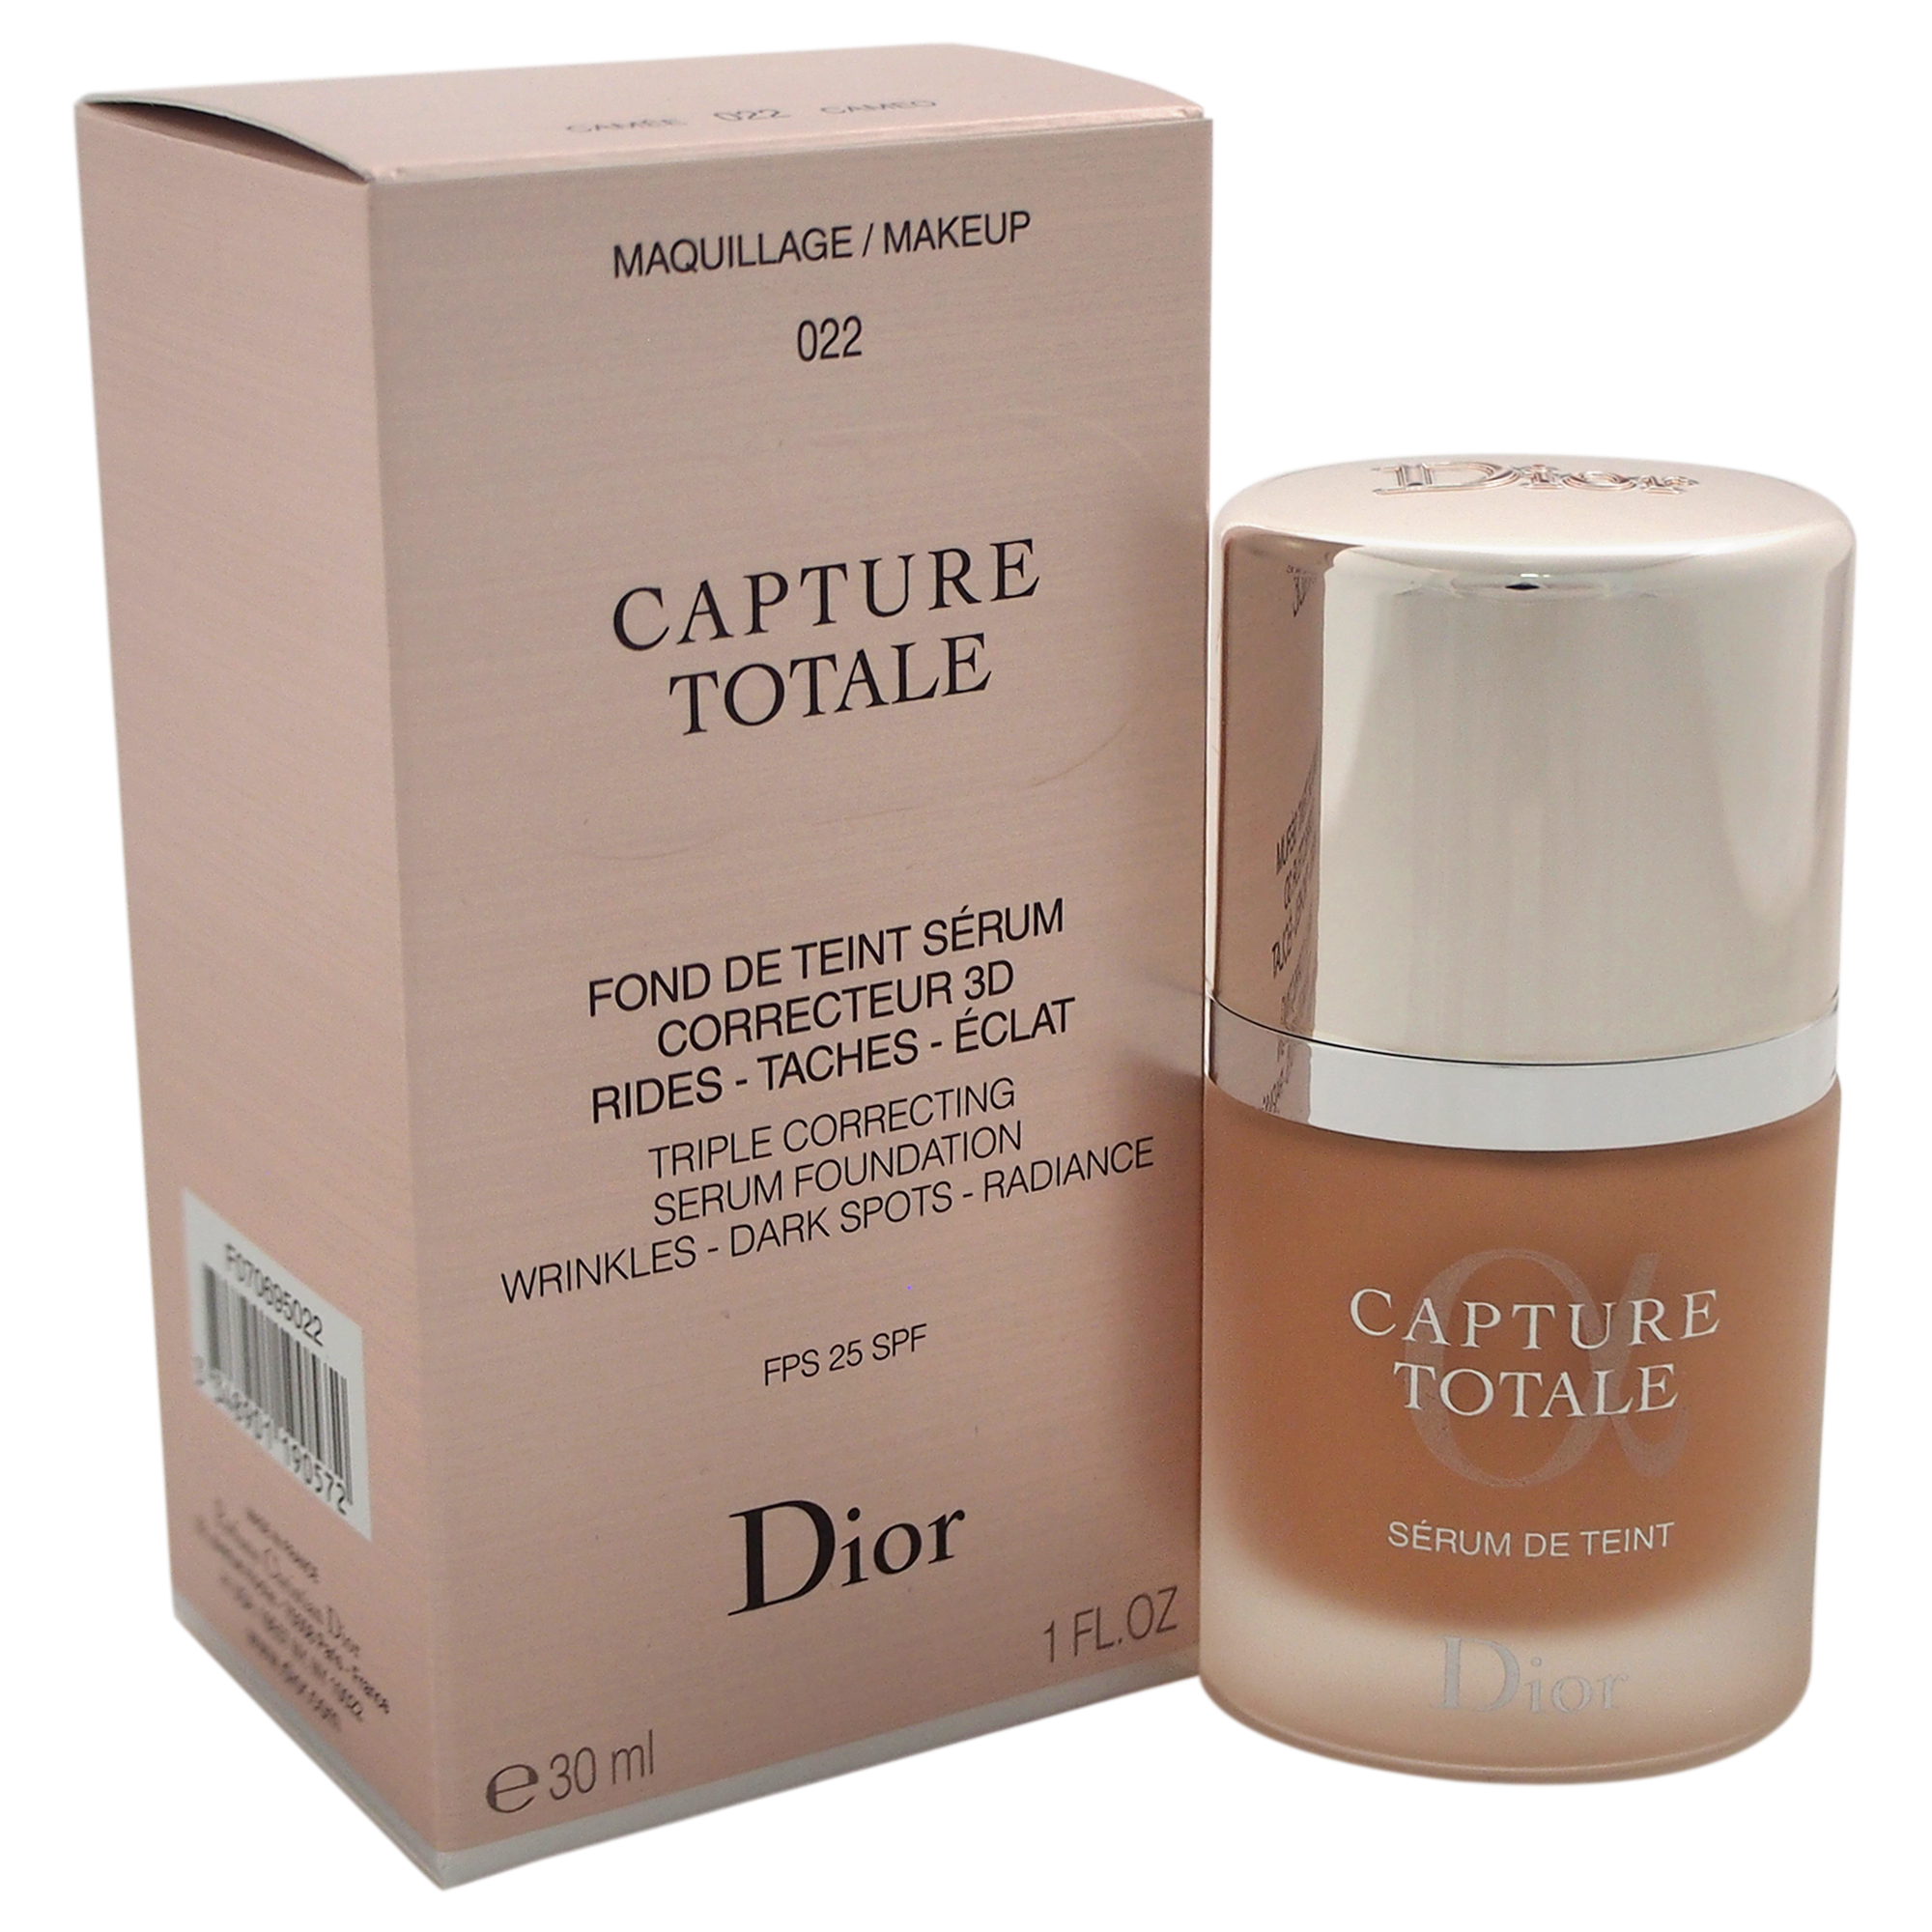 EAN 3348901190572 product image for Capture Totale Triple Correcting Serum Foundation SPF 25 - # 022 Cameo by Christ | upcitemdb.com